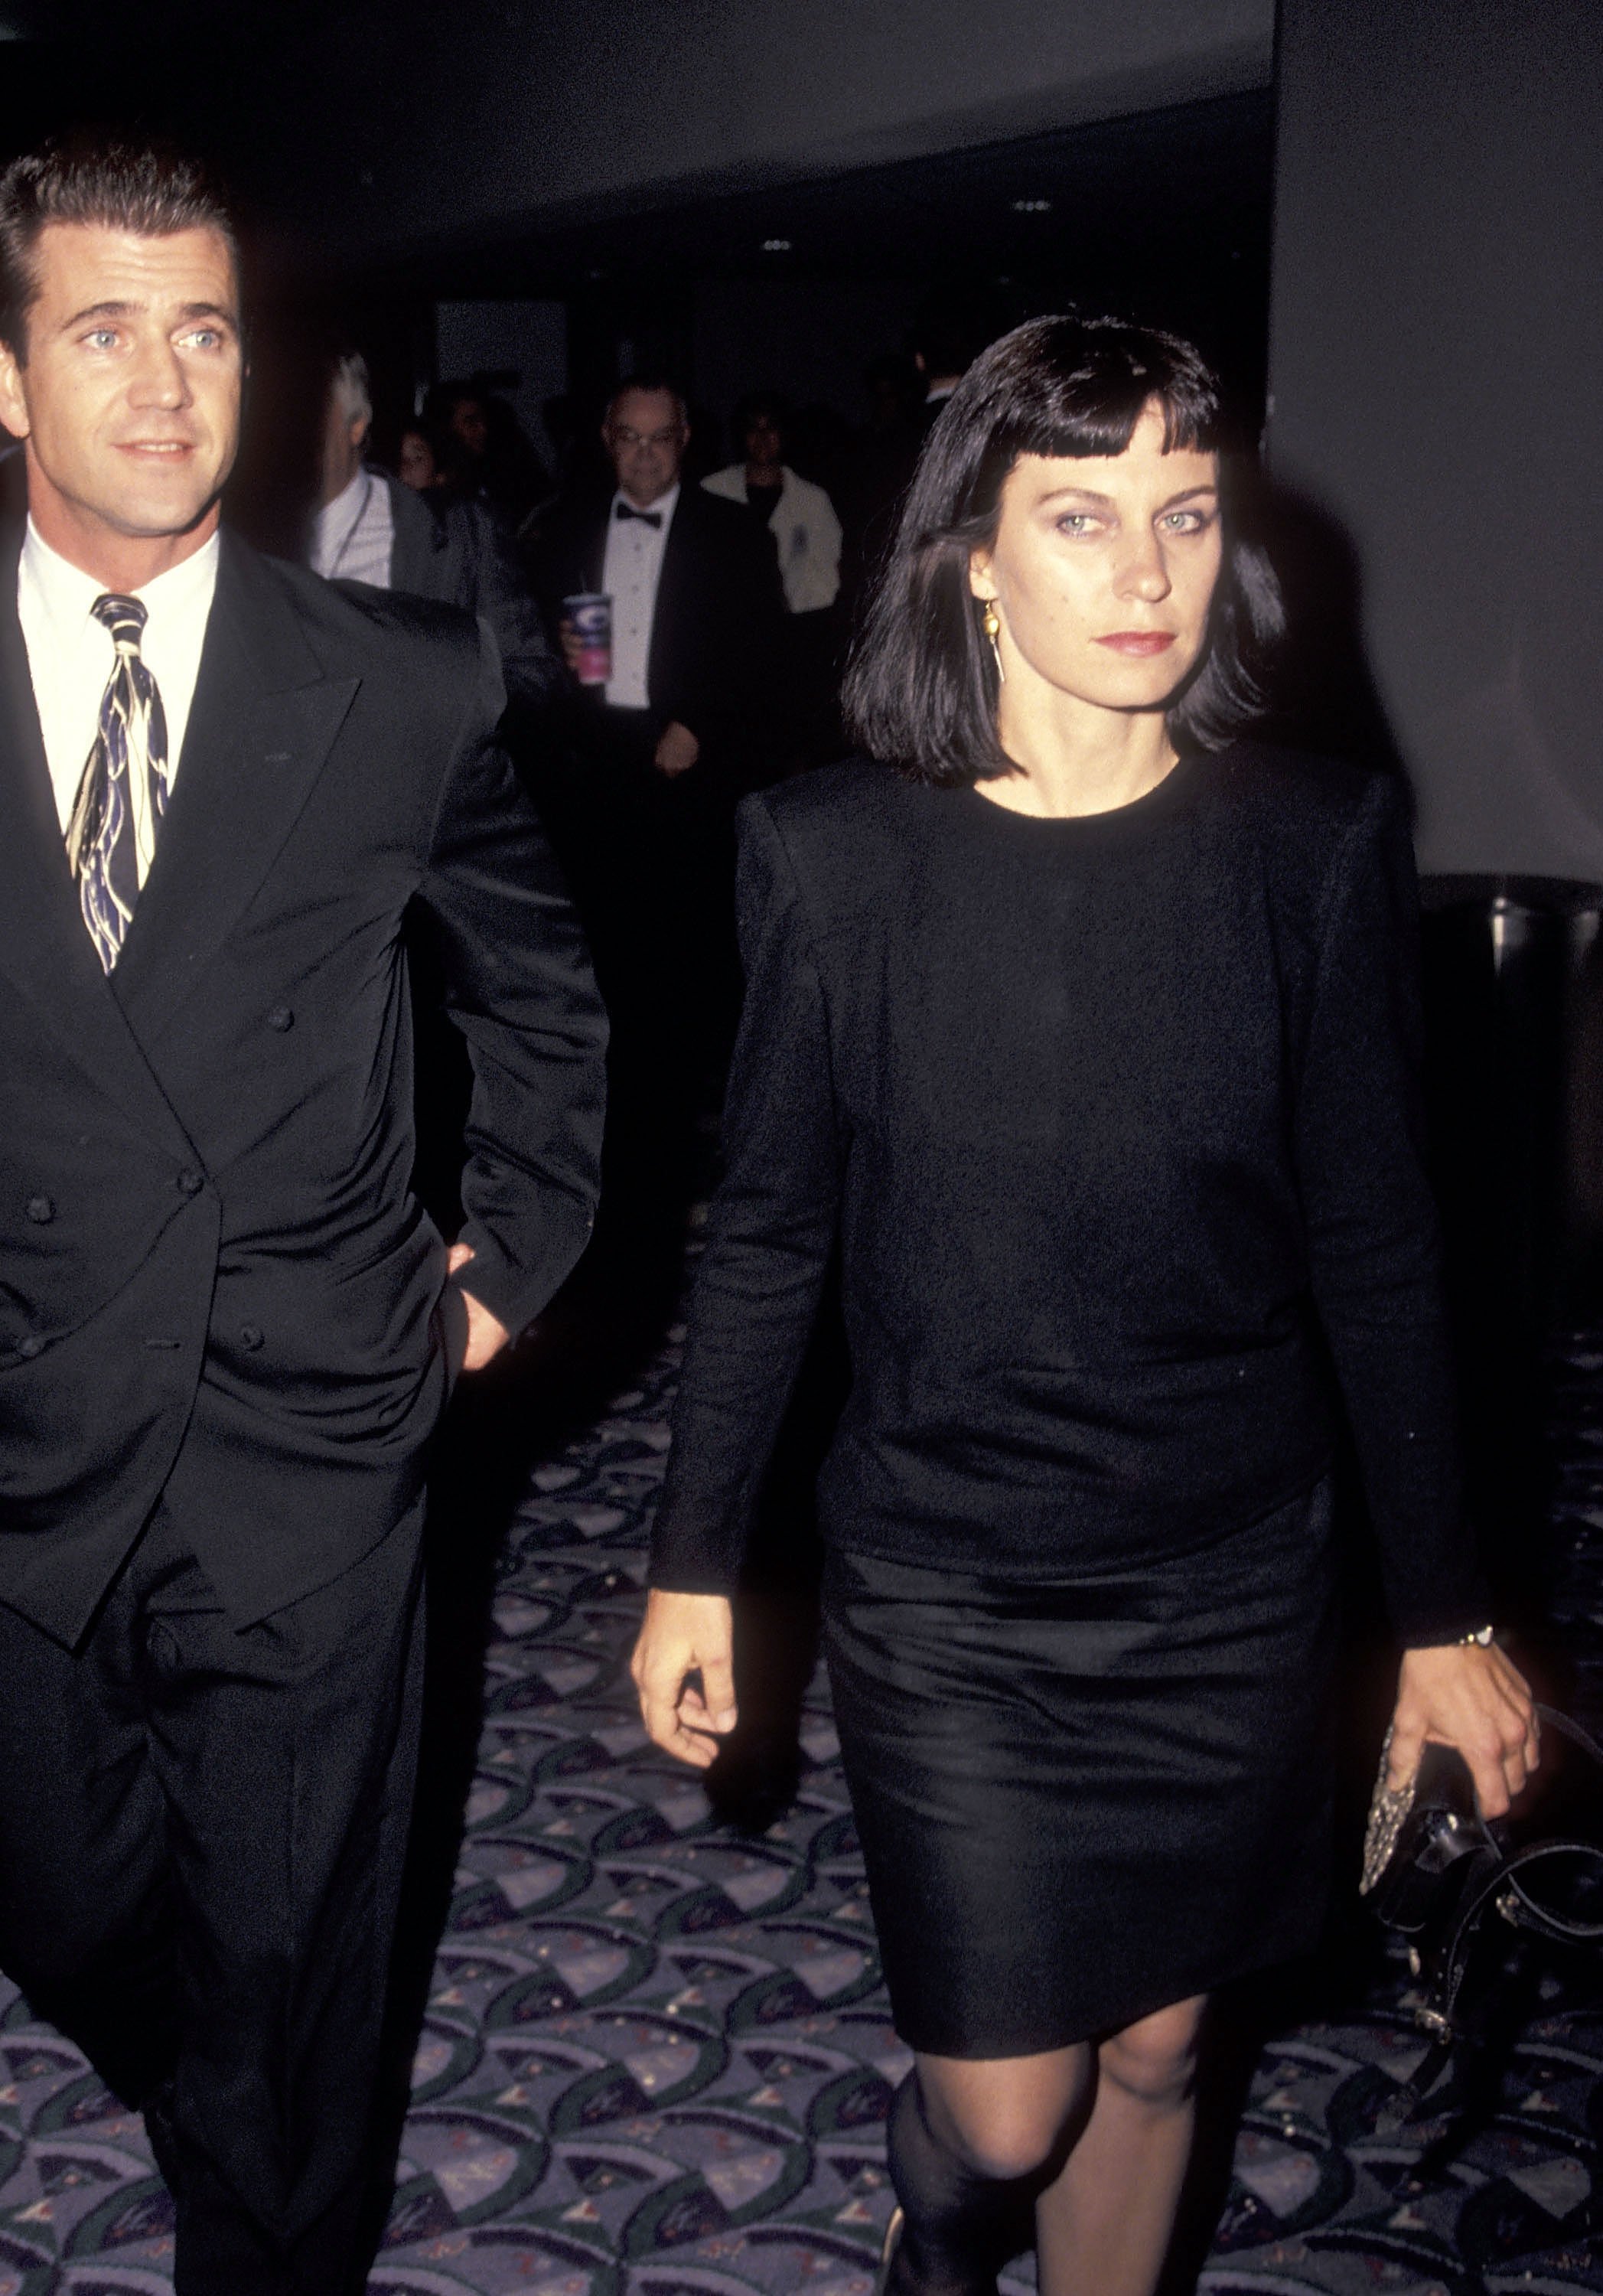 Mel Gibson and Robyn Moore attending the "Dances with Wolves" Century City premiere at Cineplex Odeon Century Plaza Cinemas on November 4, 1990 in Century City, California. / Source: Getty Images